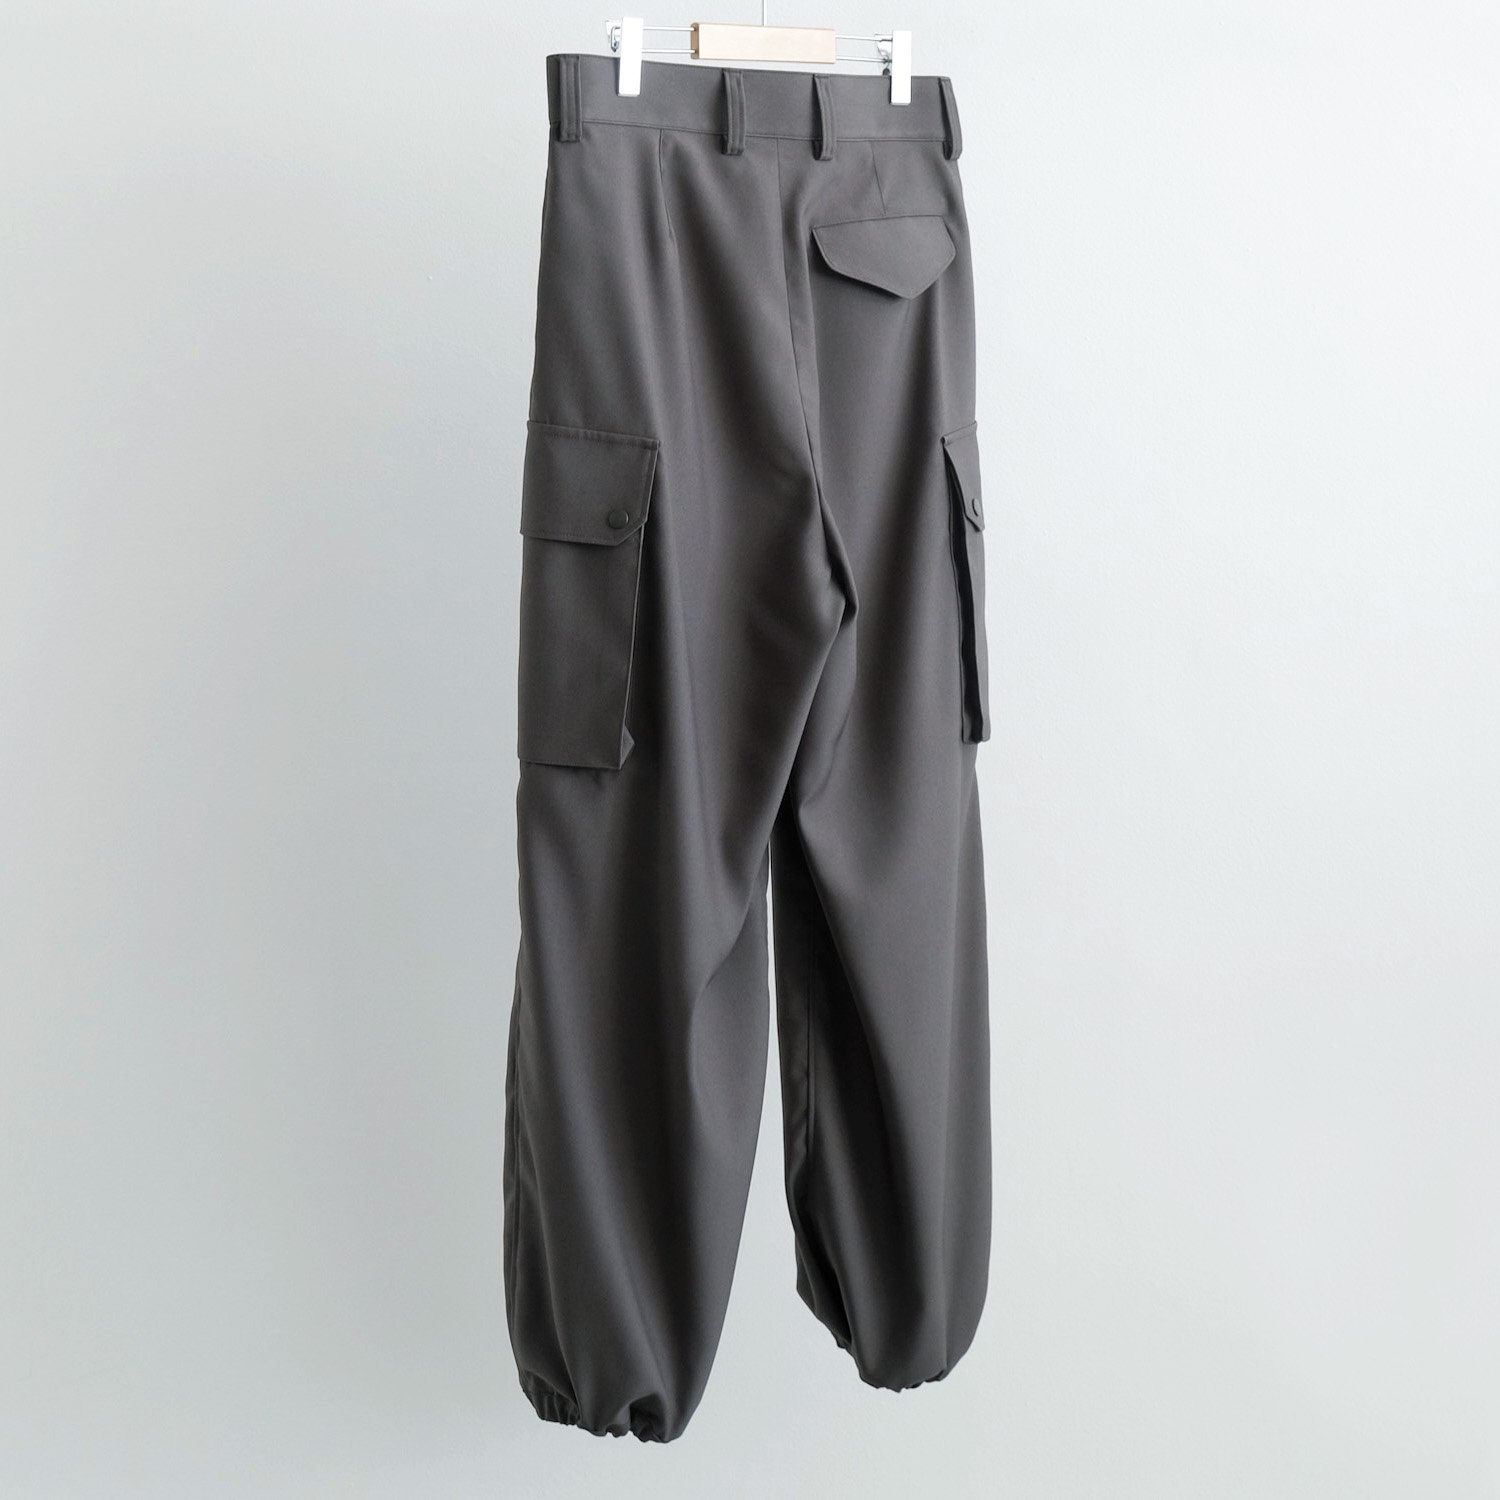 THE RERACS FRENCH ARMY F2 CARGO PANTS